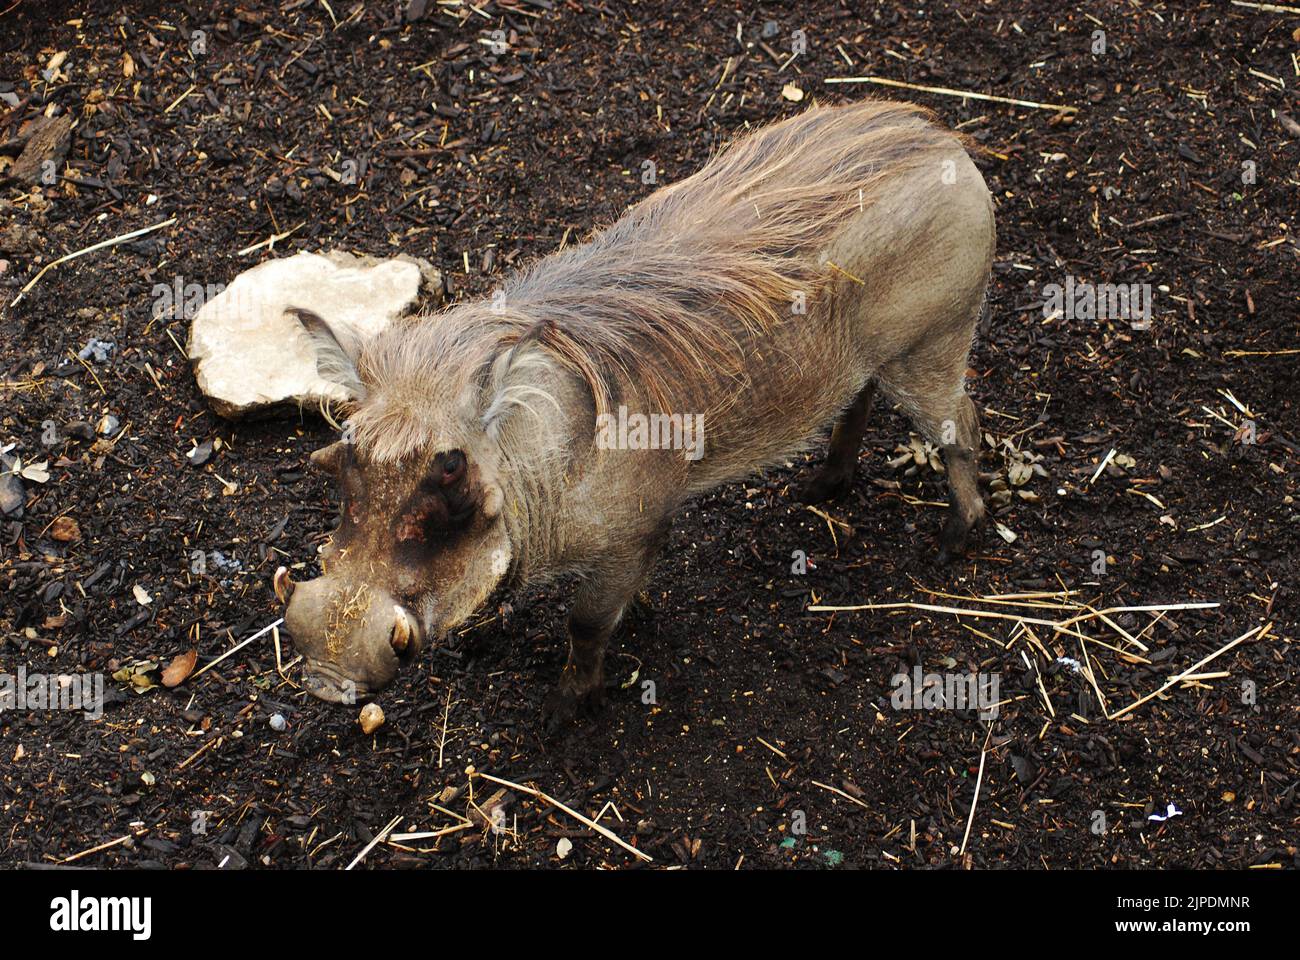 Common warthog, or warthog (Phacochoerus africanus), pigs who live in open and semi-open habitats, even in quite arid regions, in sub-Saharan Africa. Stock Photo